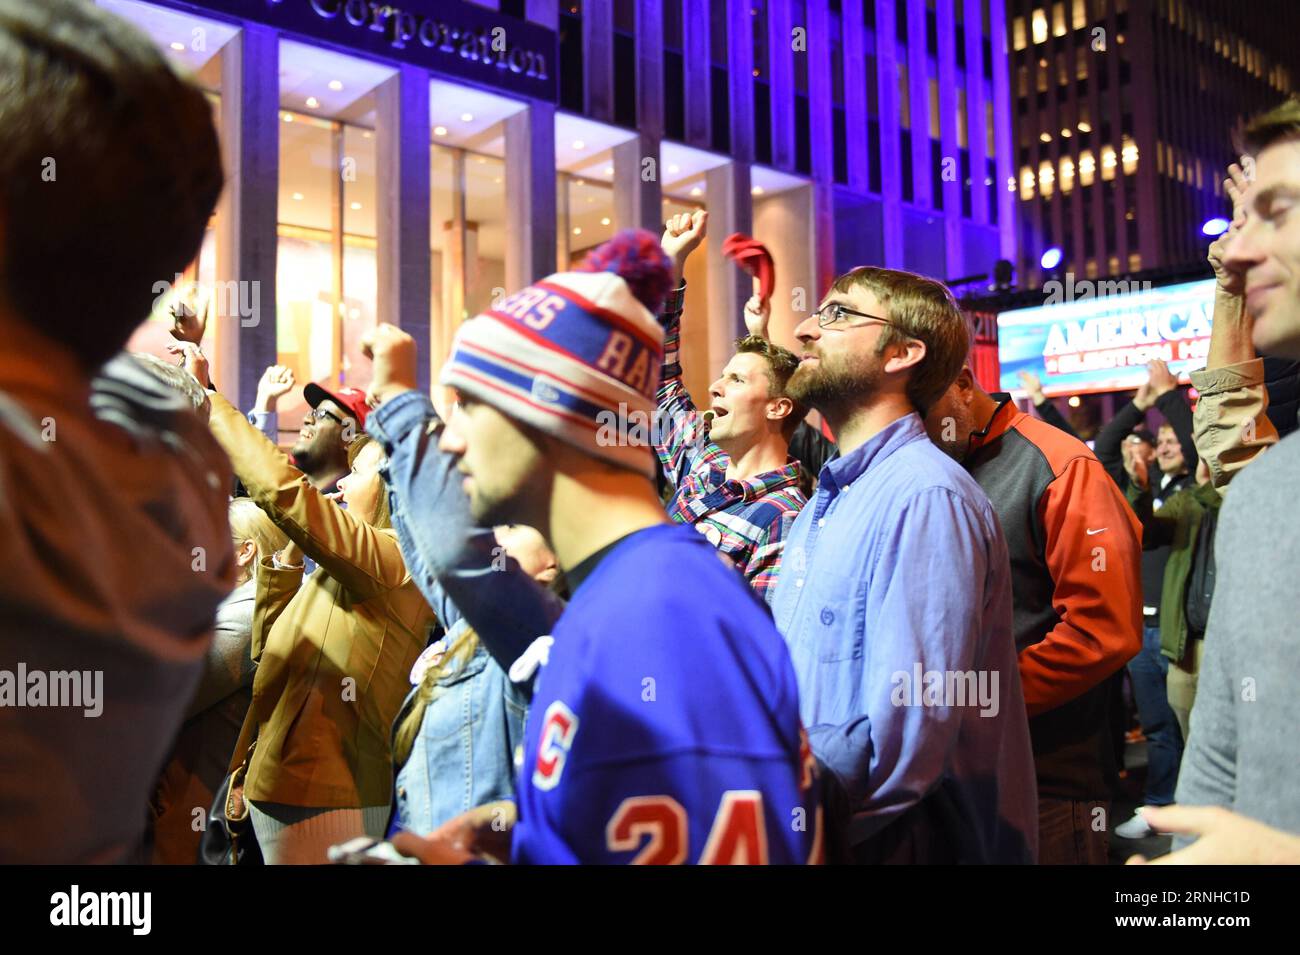 NEW YORK, Nov. 8, 2016 -- Supporters of U.S. Republican presidential candidate Donald Trump watch the process of the presidential elections outside the Fox news corporation building, New York, the United States, on Nov. 8, 2016. ) U.S.-NEW YORK-DONALD TRUMP-SUPPORTERS BaoxDandan PUBLICATIONxNOTxINxCHN   New York Nov 8 2016 Supporters of U S Republican Presidential Candidate Donald Trump Watch The Process of The Presidential Elections outside The Fox News Corporation Building New York The United States ON Nov 8 2016 U S New York Donald Trump Supporters baoxdandan PUBLICATIONxNOTxINxCHN Stock Photo